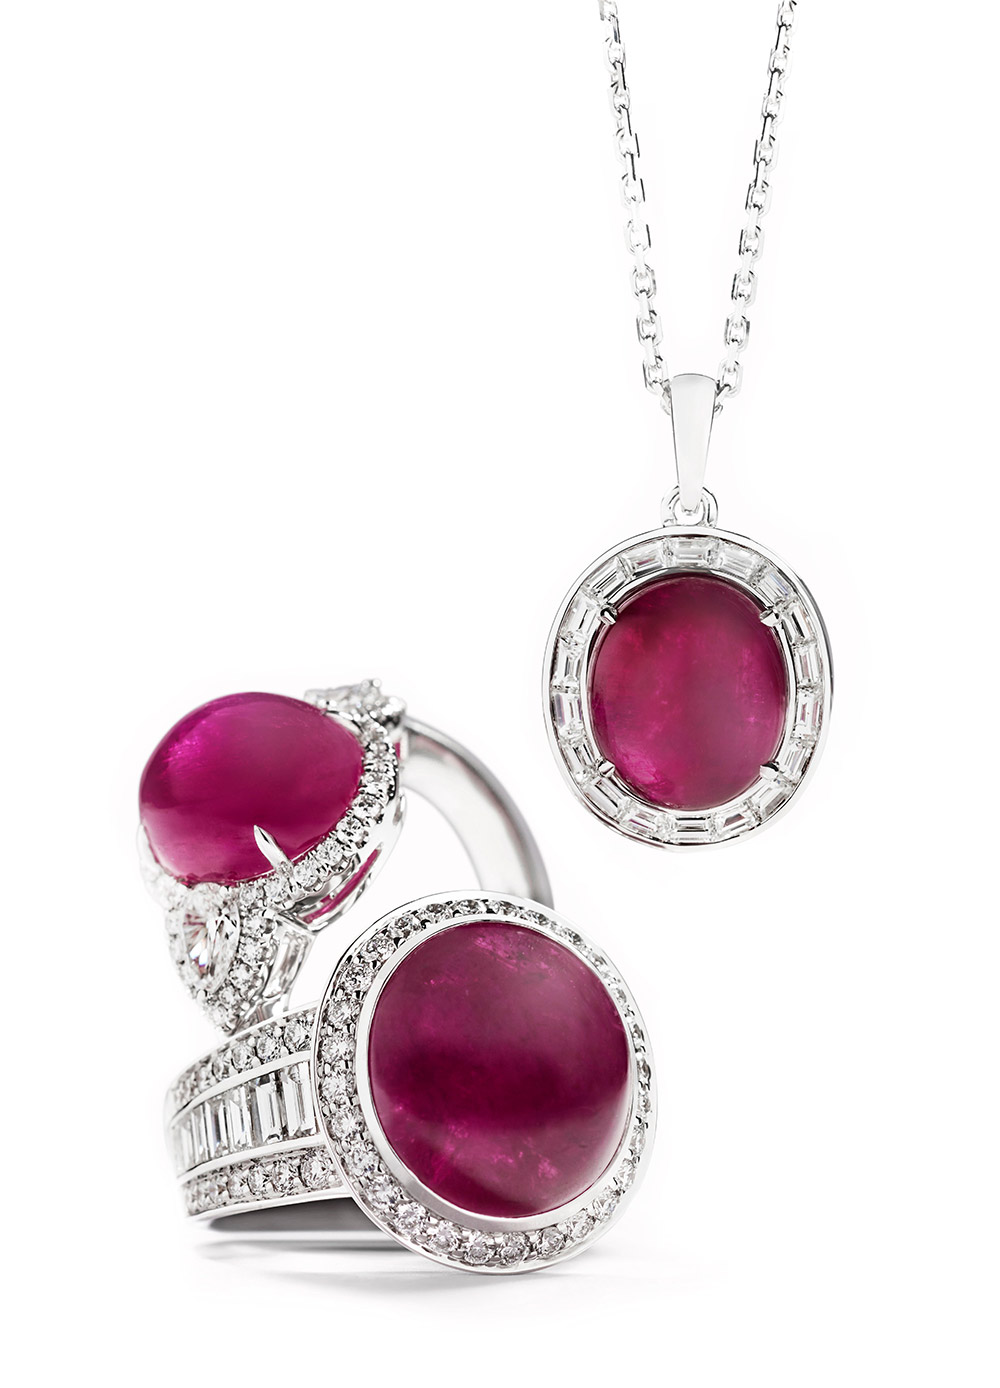 Hartmann's rings and a pendant from the collection with Greenland rubies